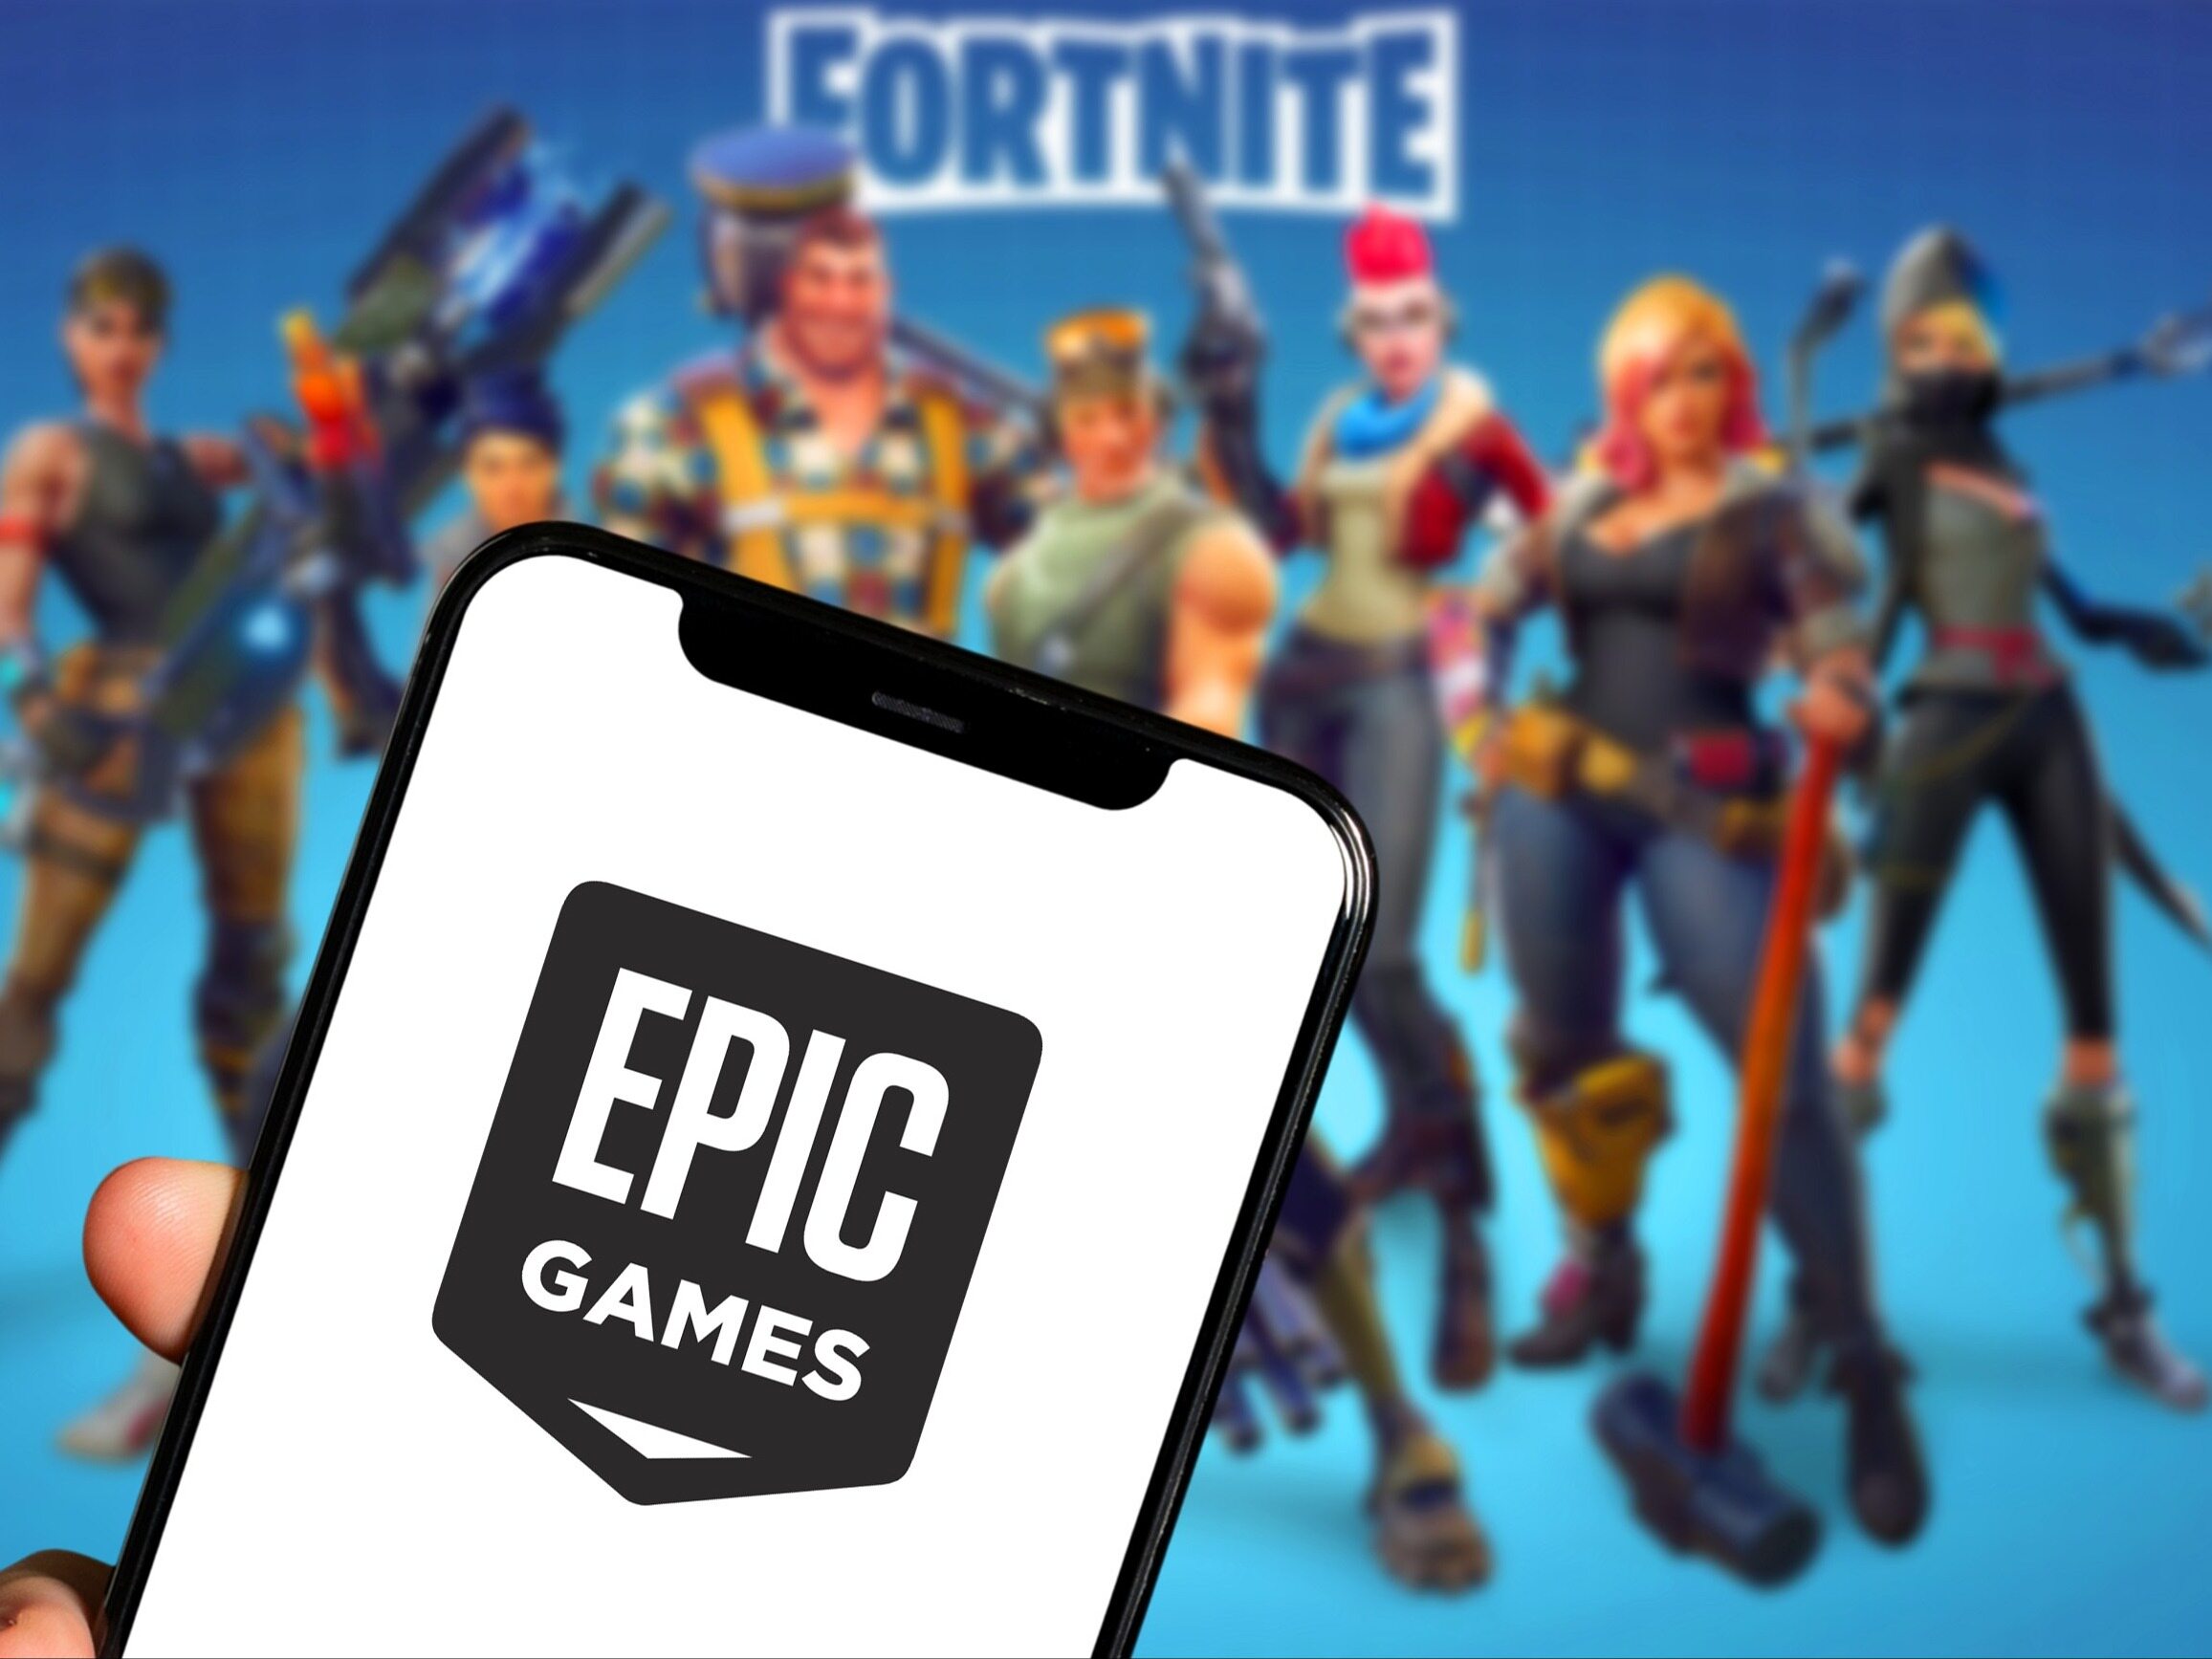 Epic Games is slowing down a lot.  Fortnite doesn't make enough money